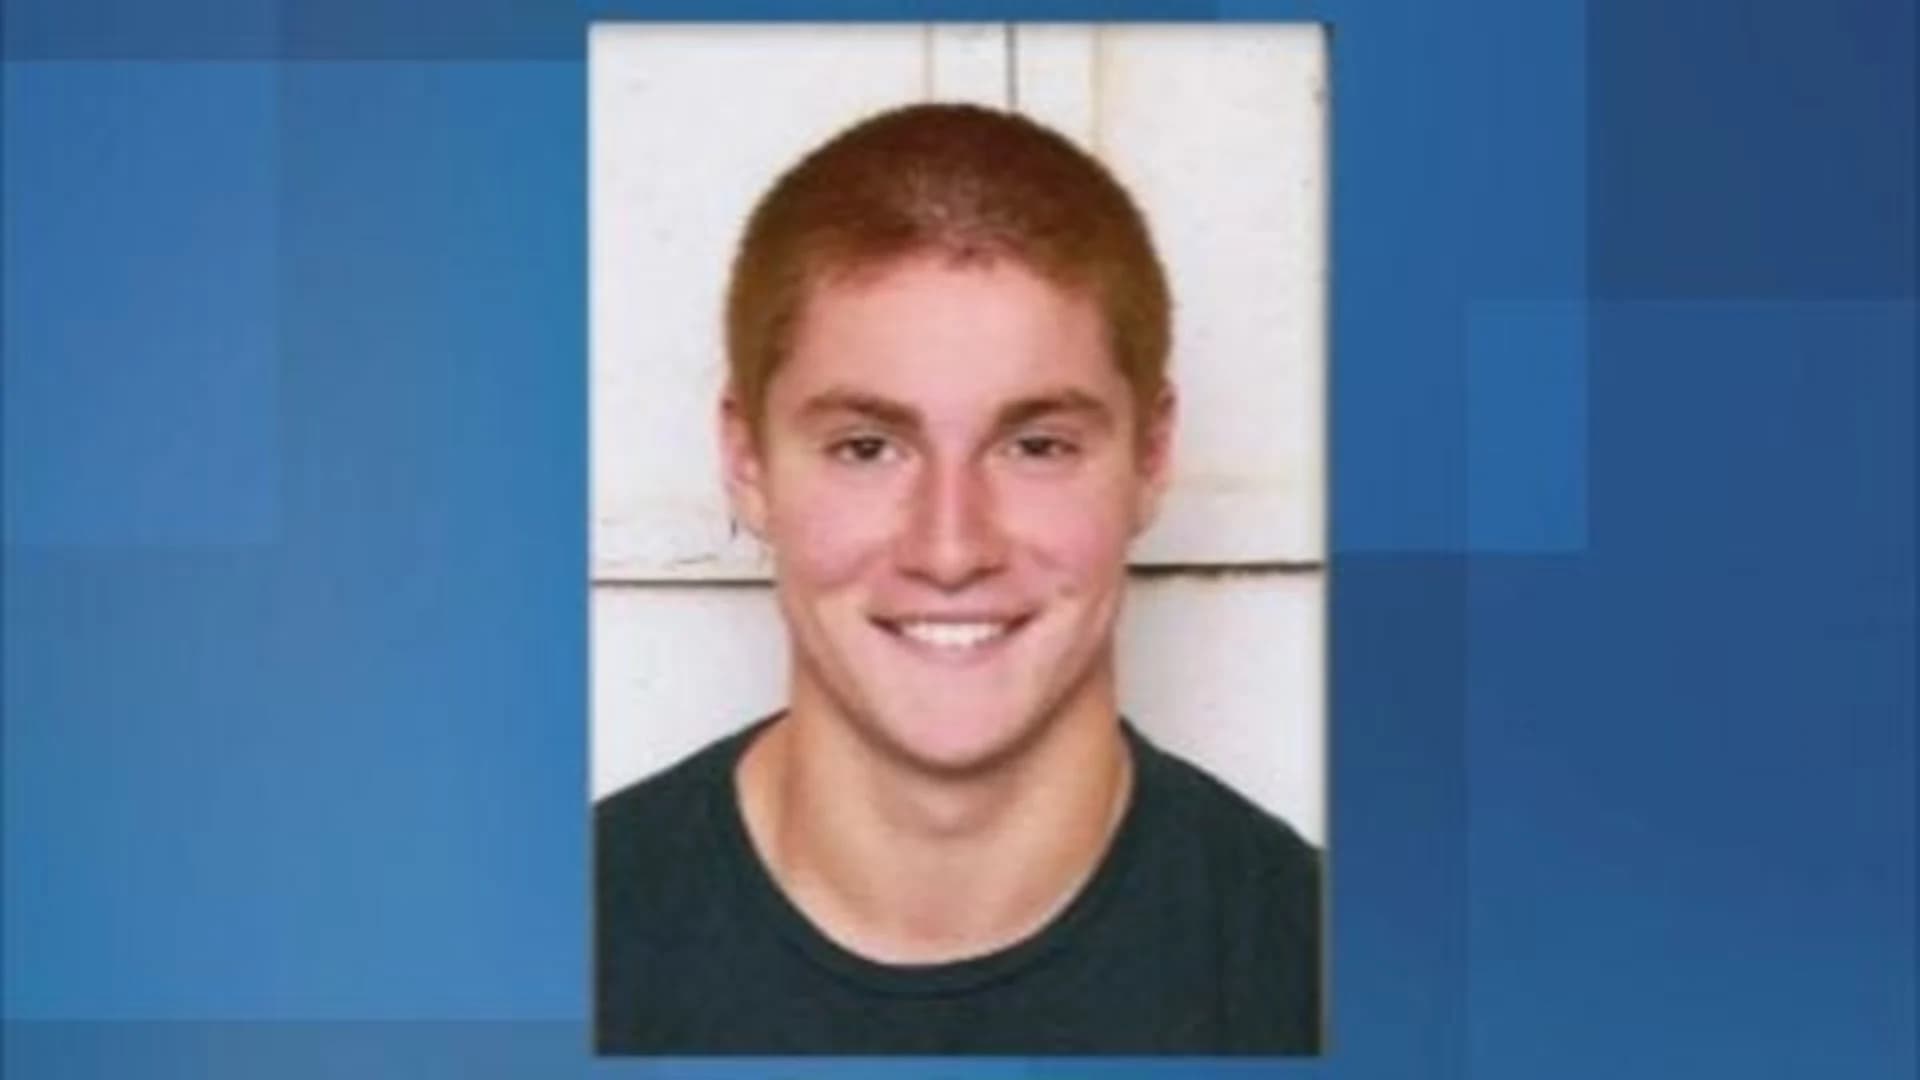 Video shows Penn State frat pledge in agony after fall